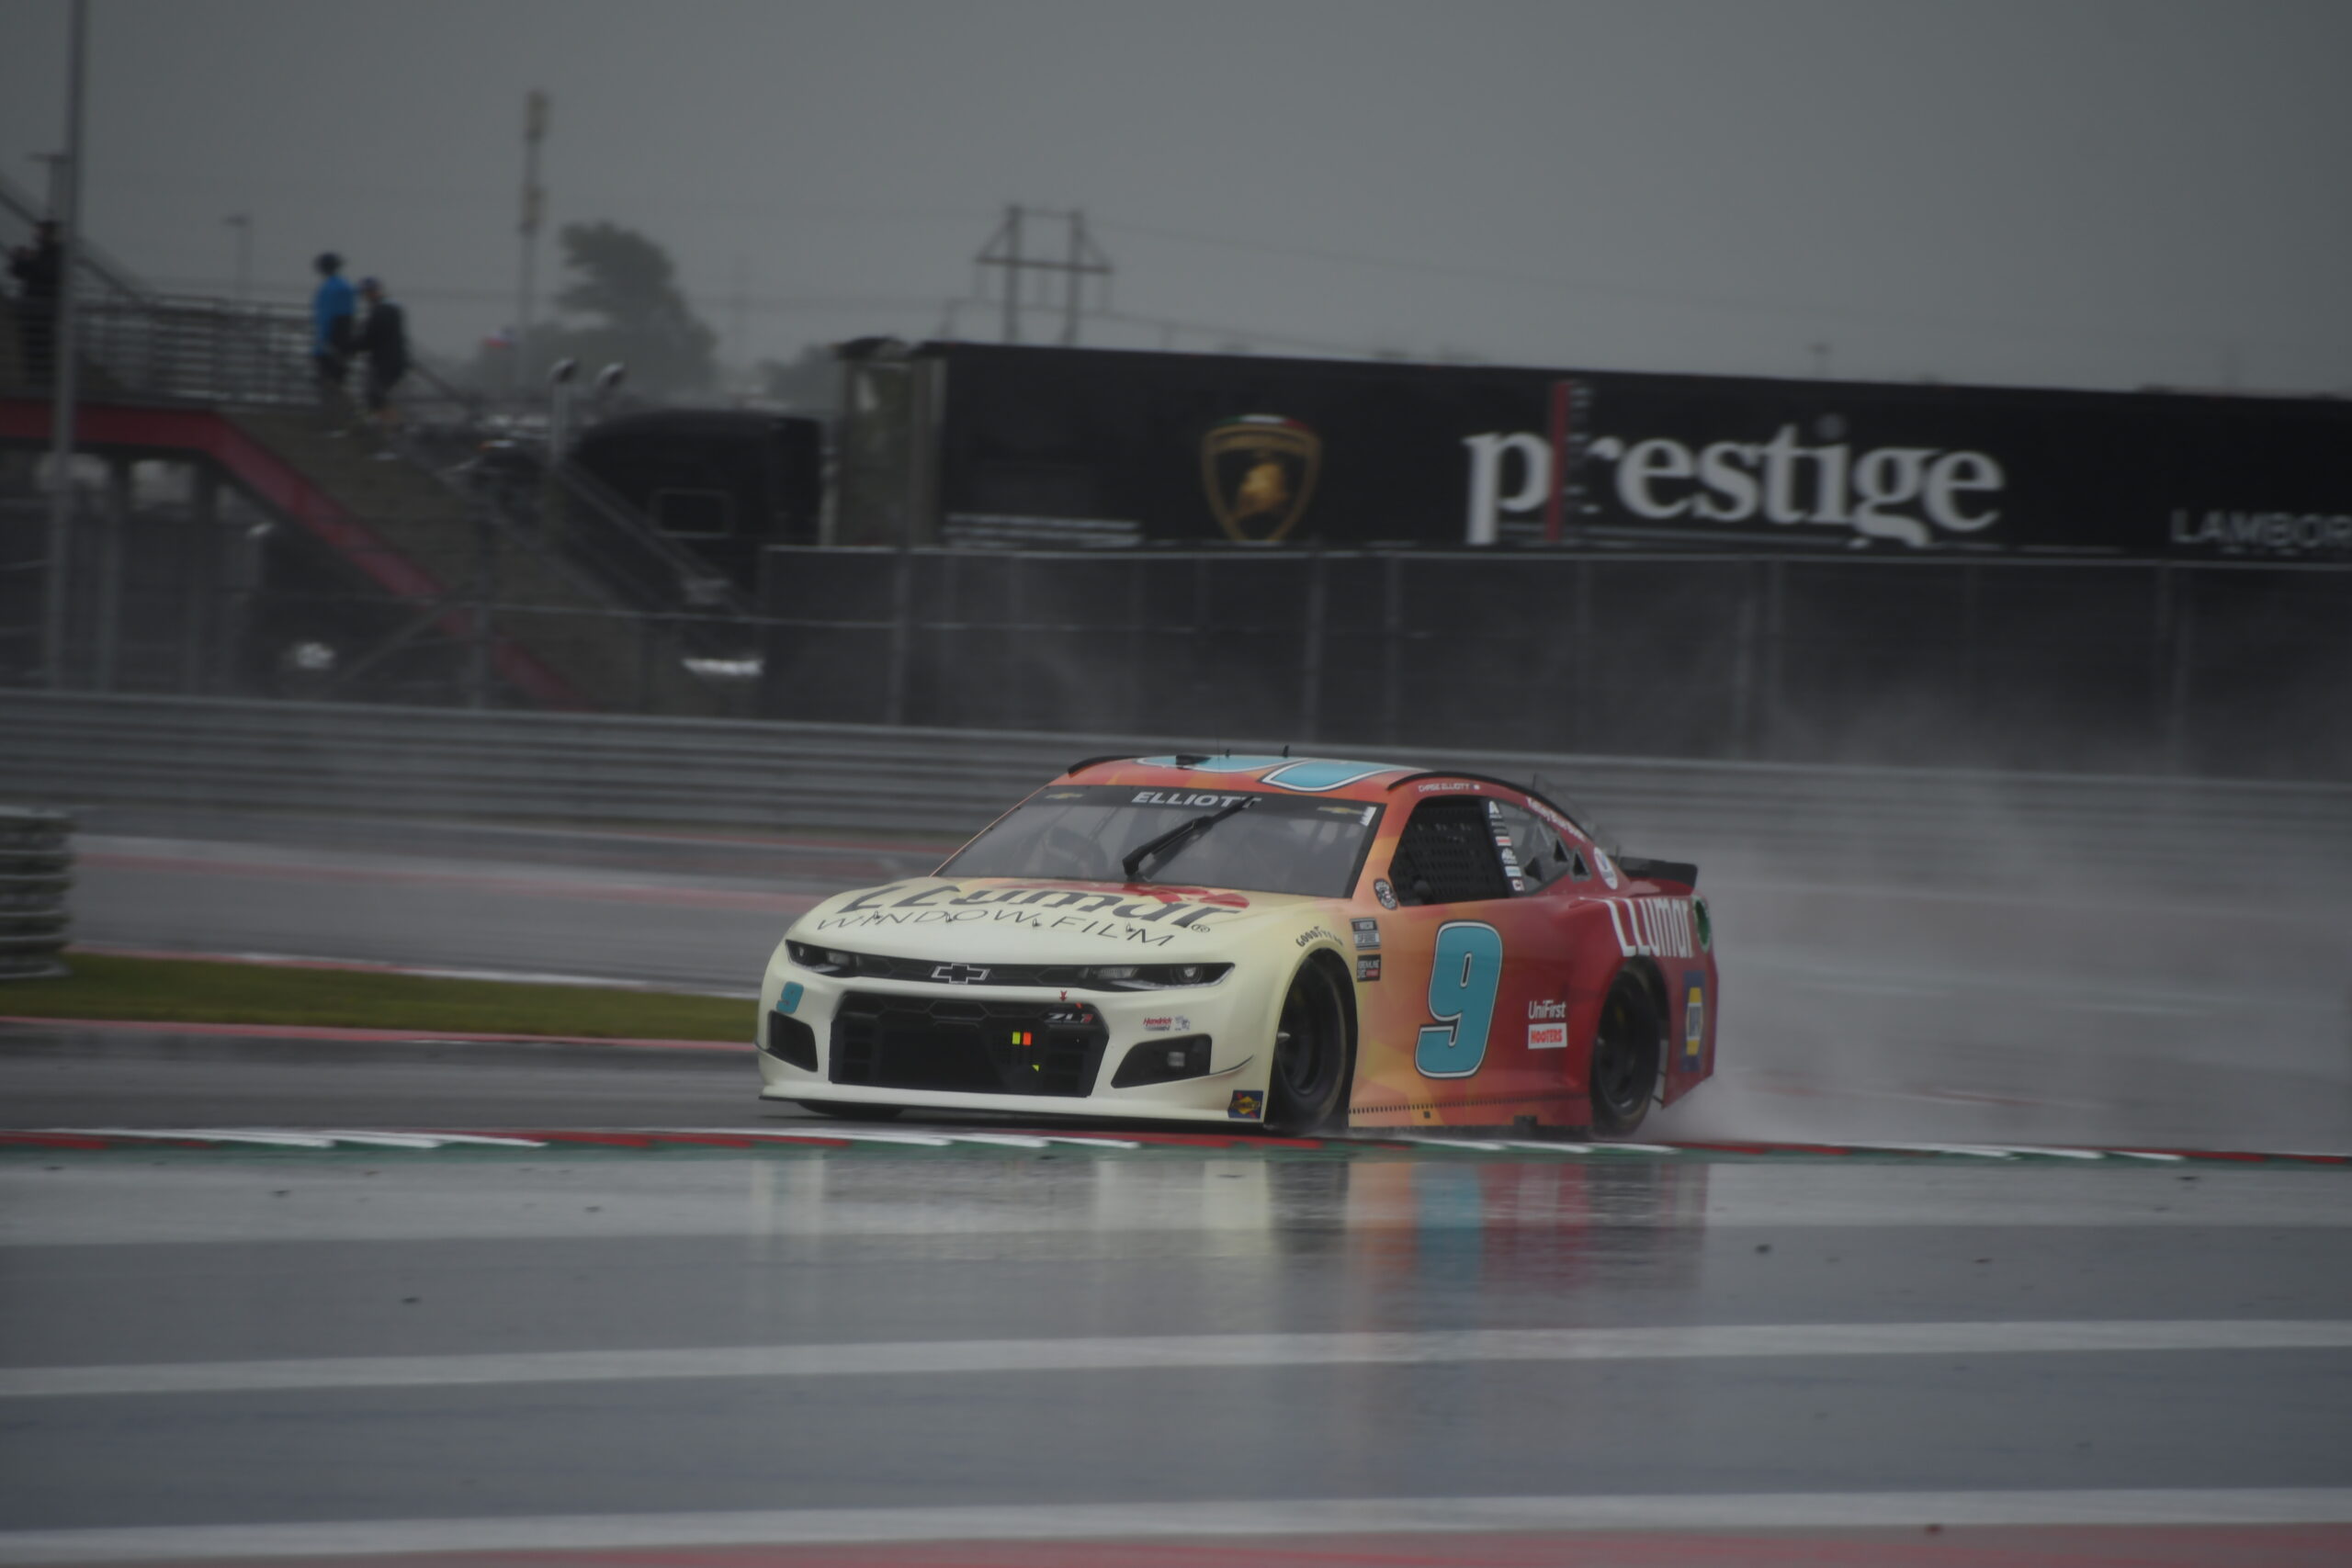 Generally speaking, racing at COTA yields general enthusiasm from the team and road course aces like Chase Elliott. (Photo: Sean Folsom/The Podium Finish)